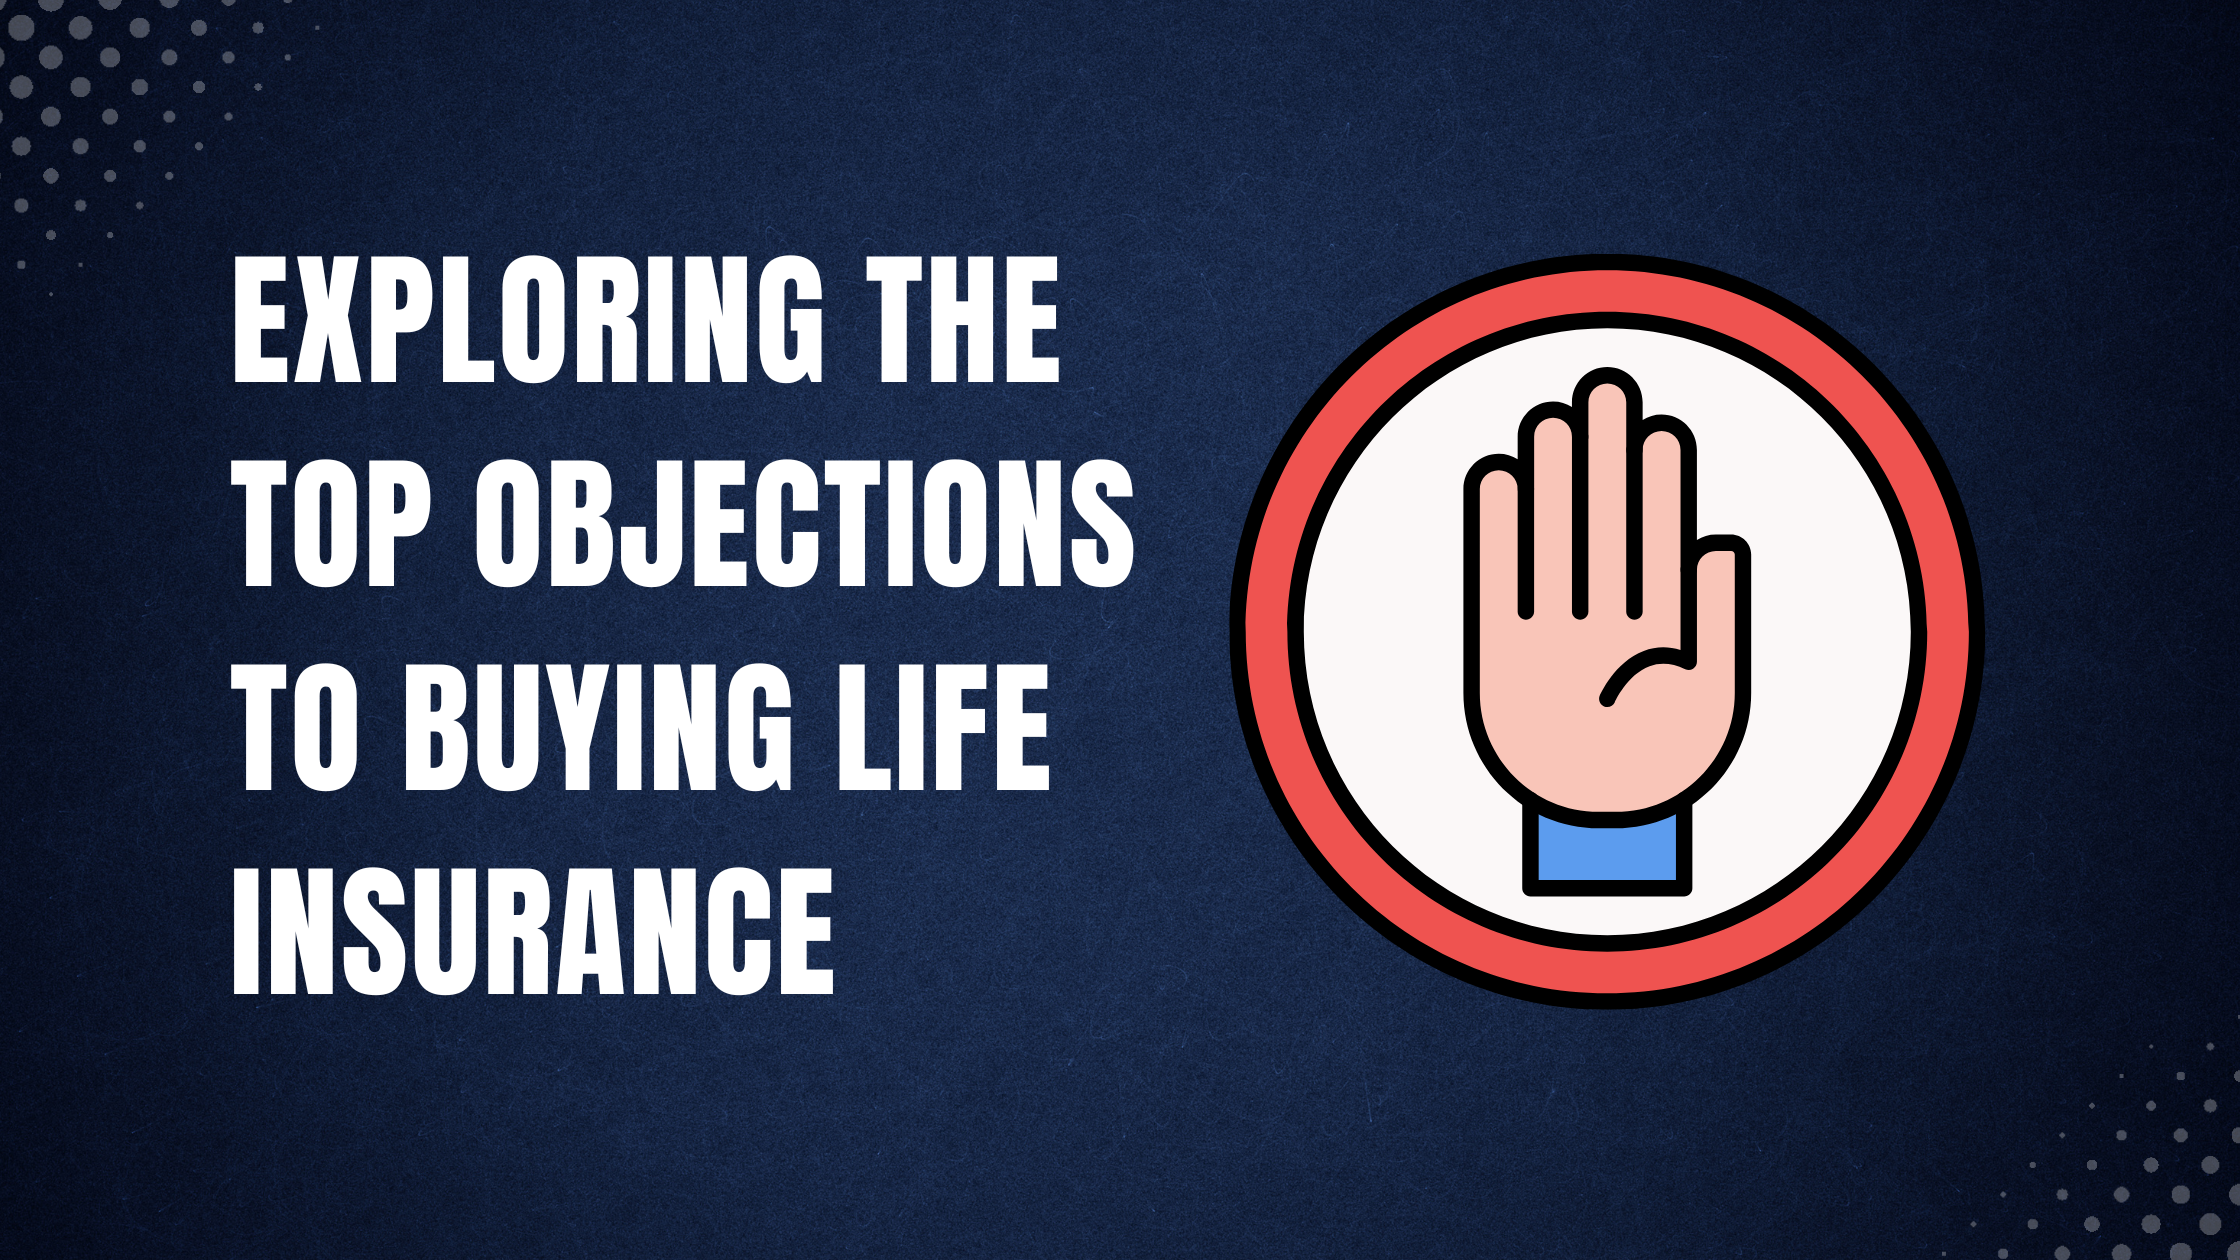 Exploring the Top Objections to Buying Life Insurance